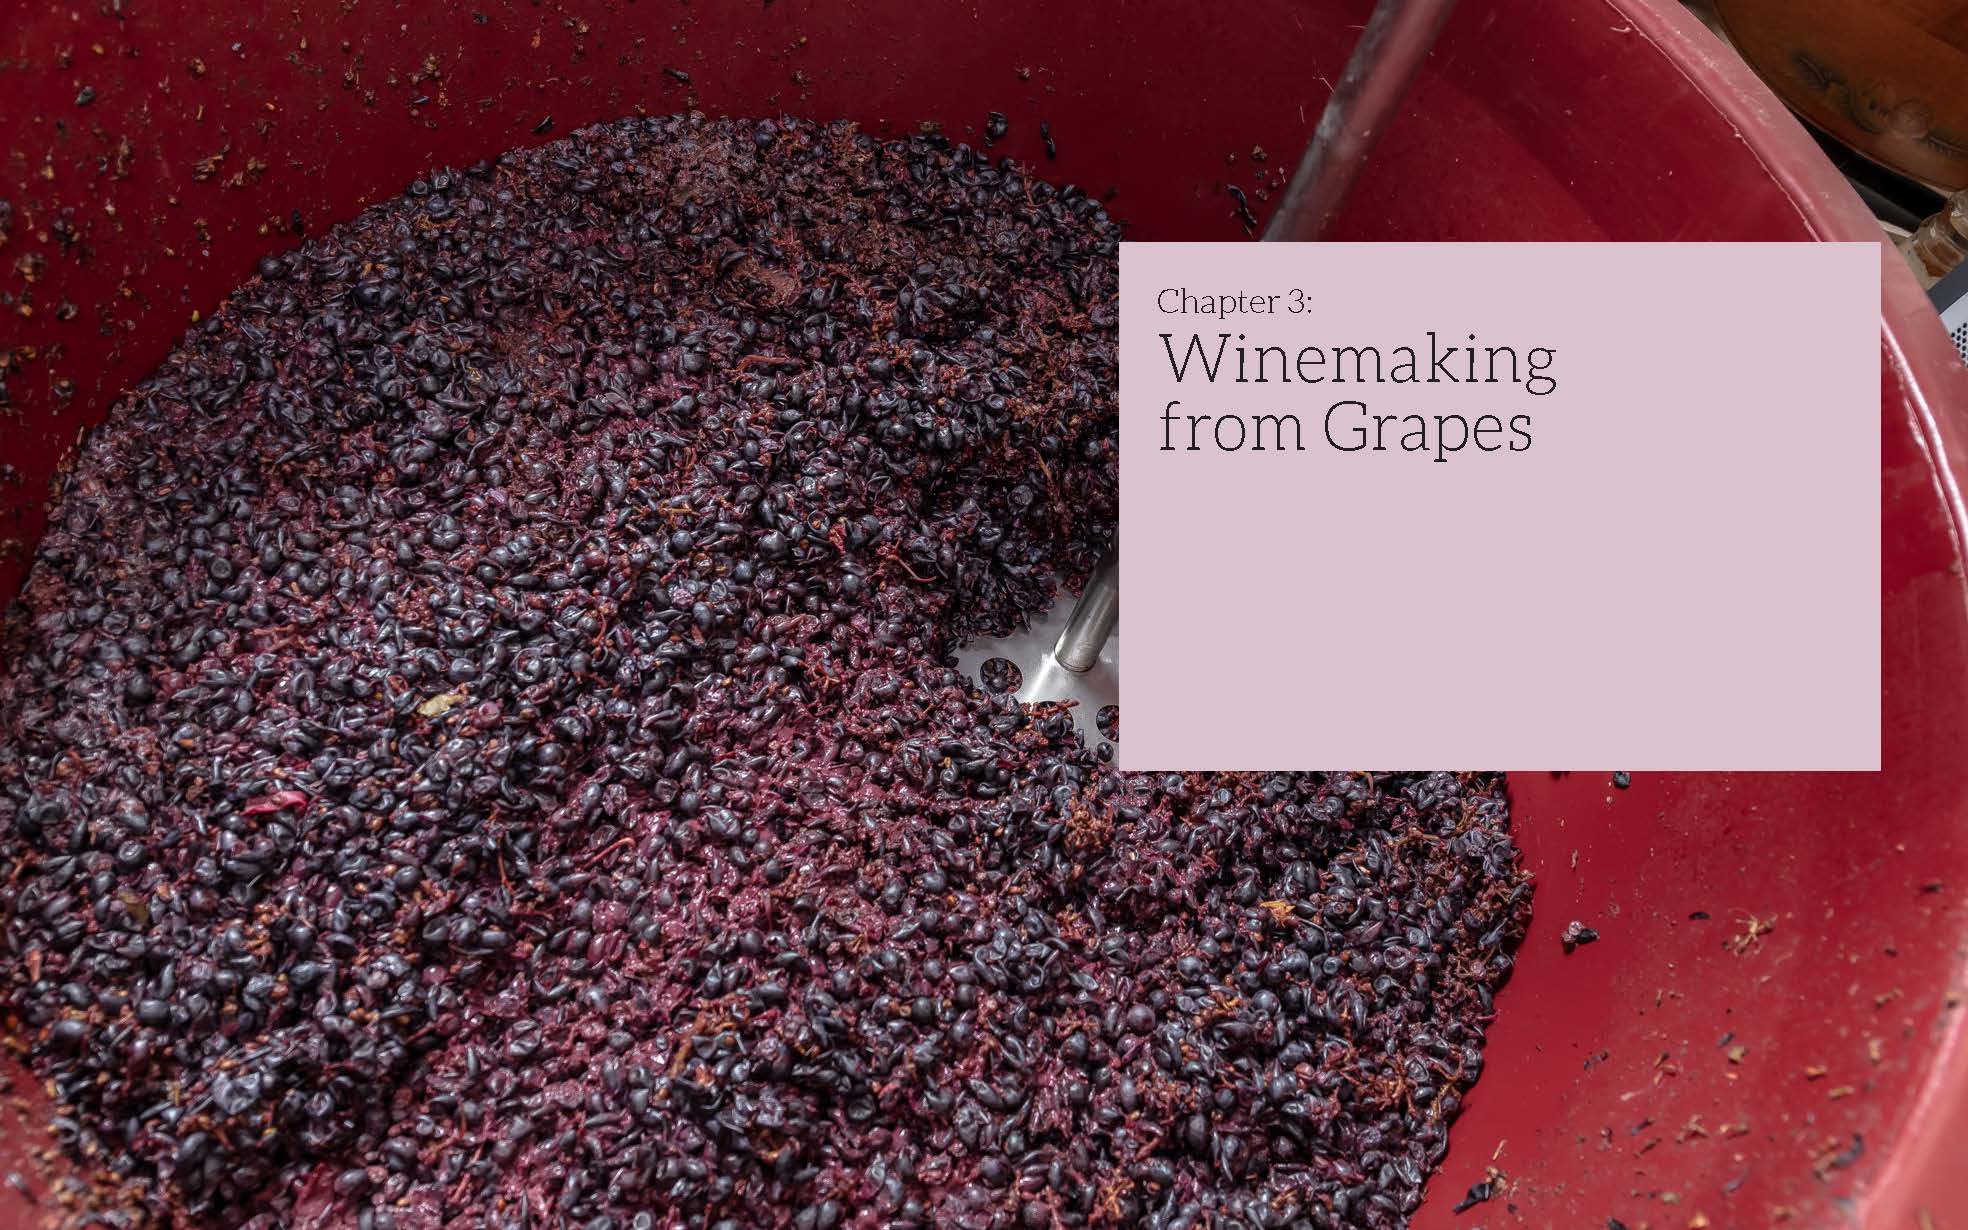 The WineMaker Guide to Home Winemaking